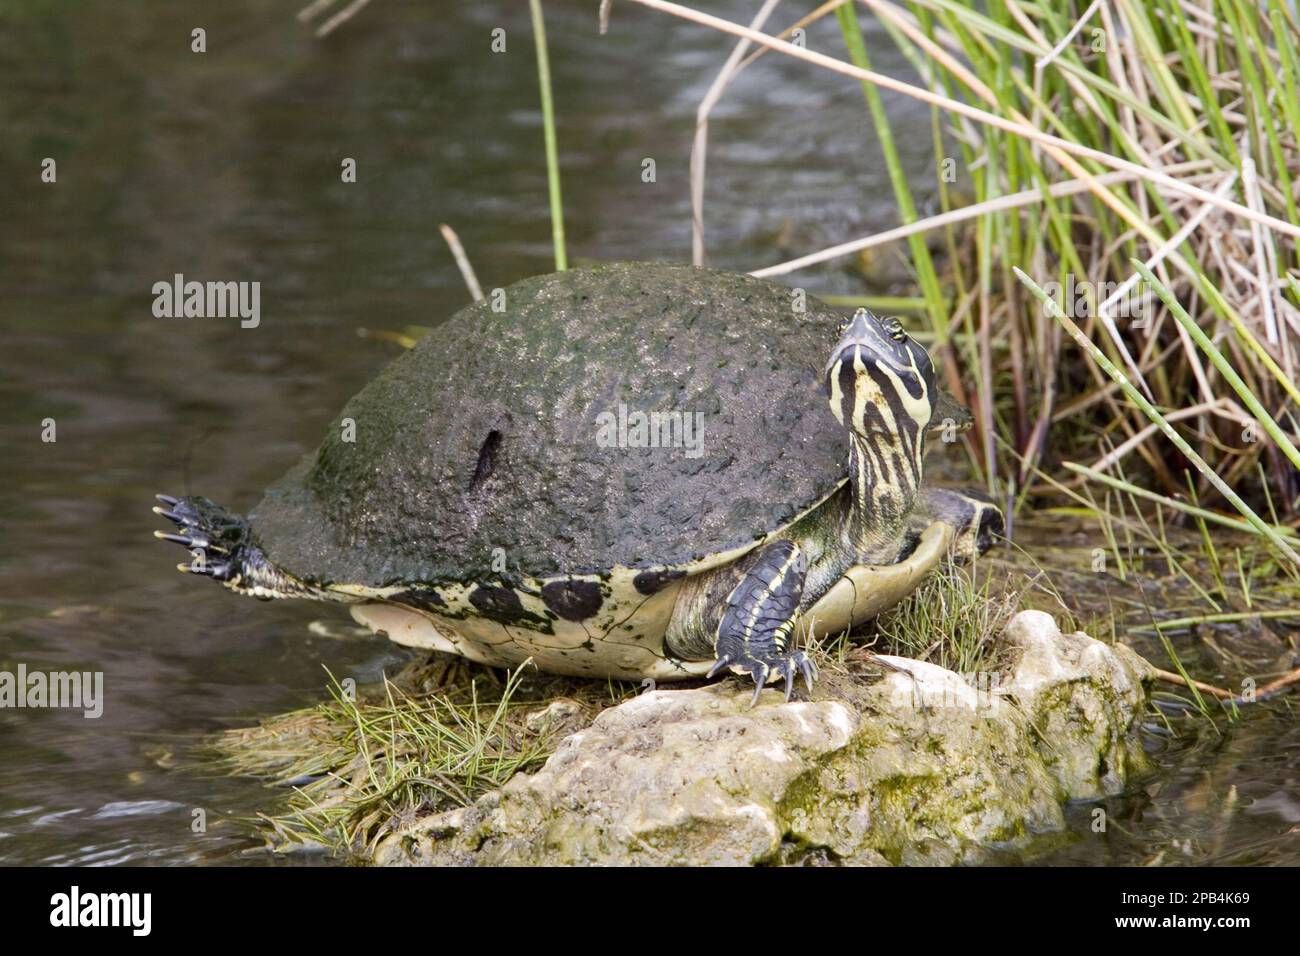 (Pseudemys rubriventris) nelsoni, florida red-bellied cooter (Pseudemys nelsoni), red-bellied ornamental turtles, red-bellied ornamental turtles Stock Photo